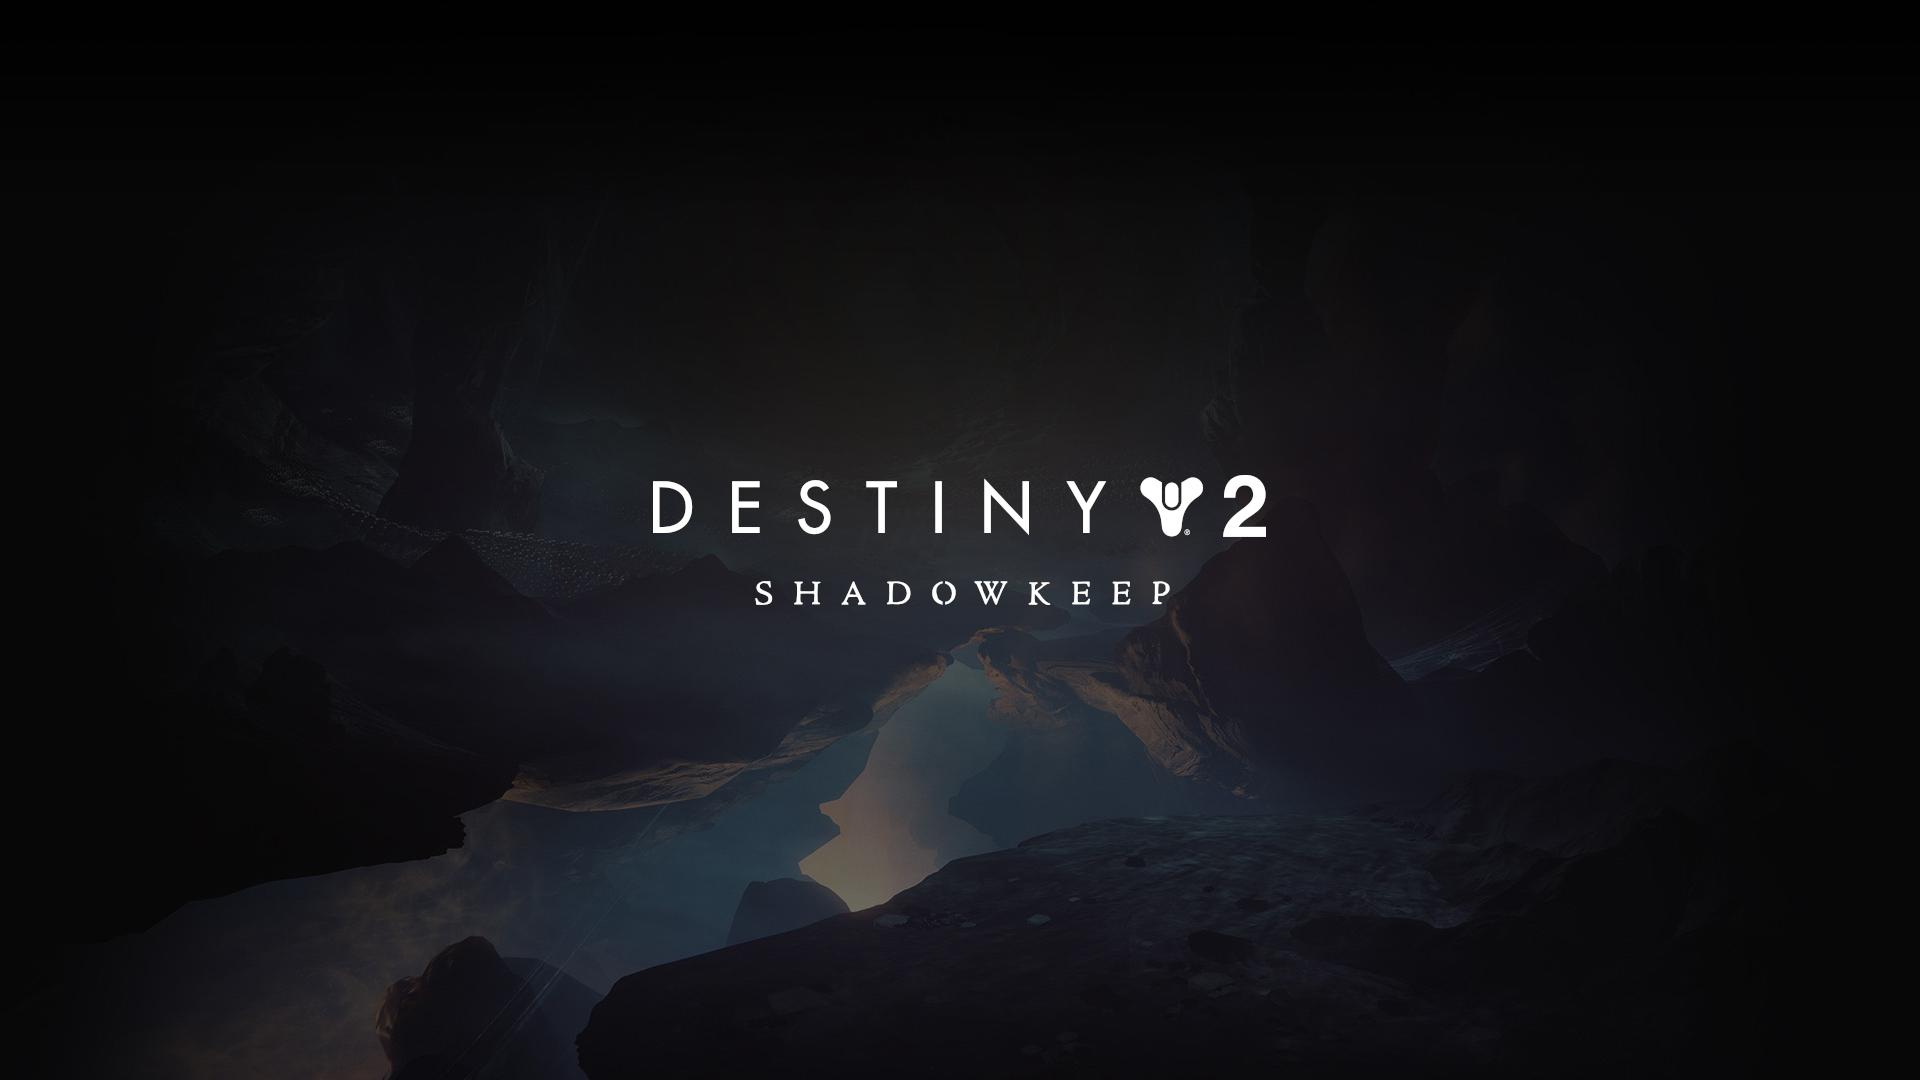 Wallpaper Activision, Video Games, Destiny 2 Shadowkeep, Destiny 2  Forsaken, Strategy Video Game, Background - Download Free Image